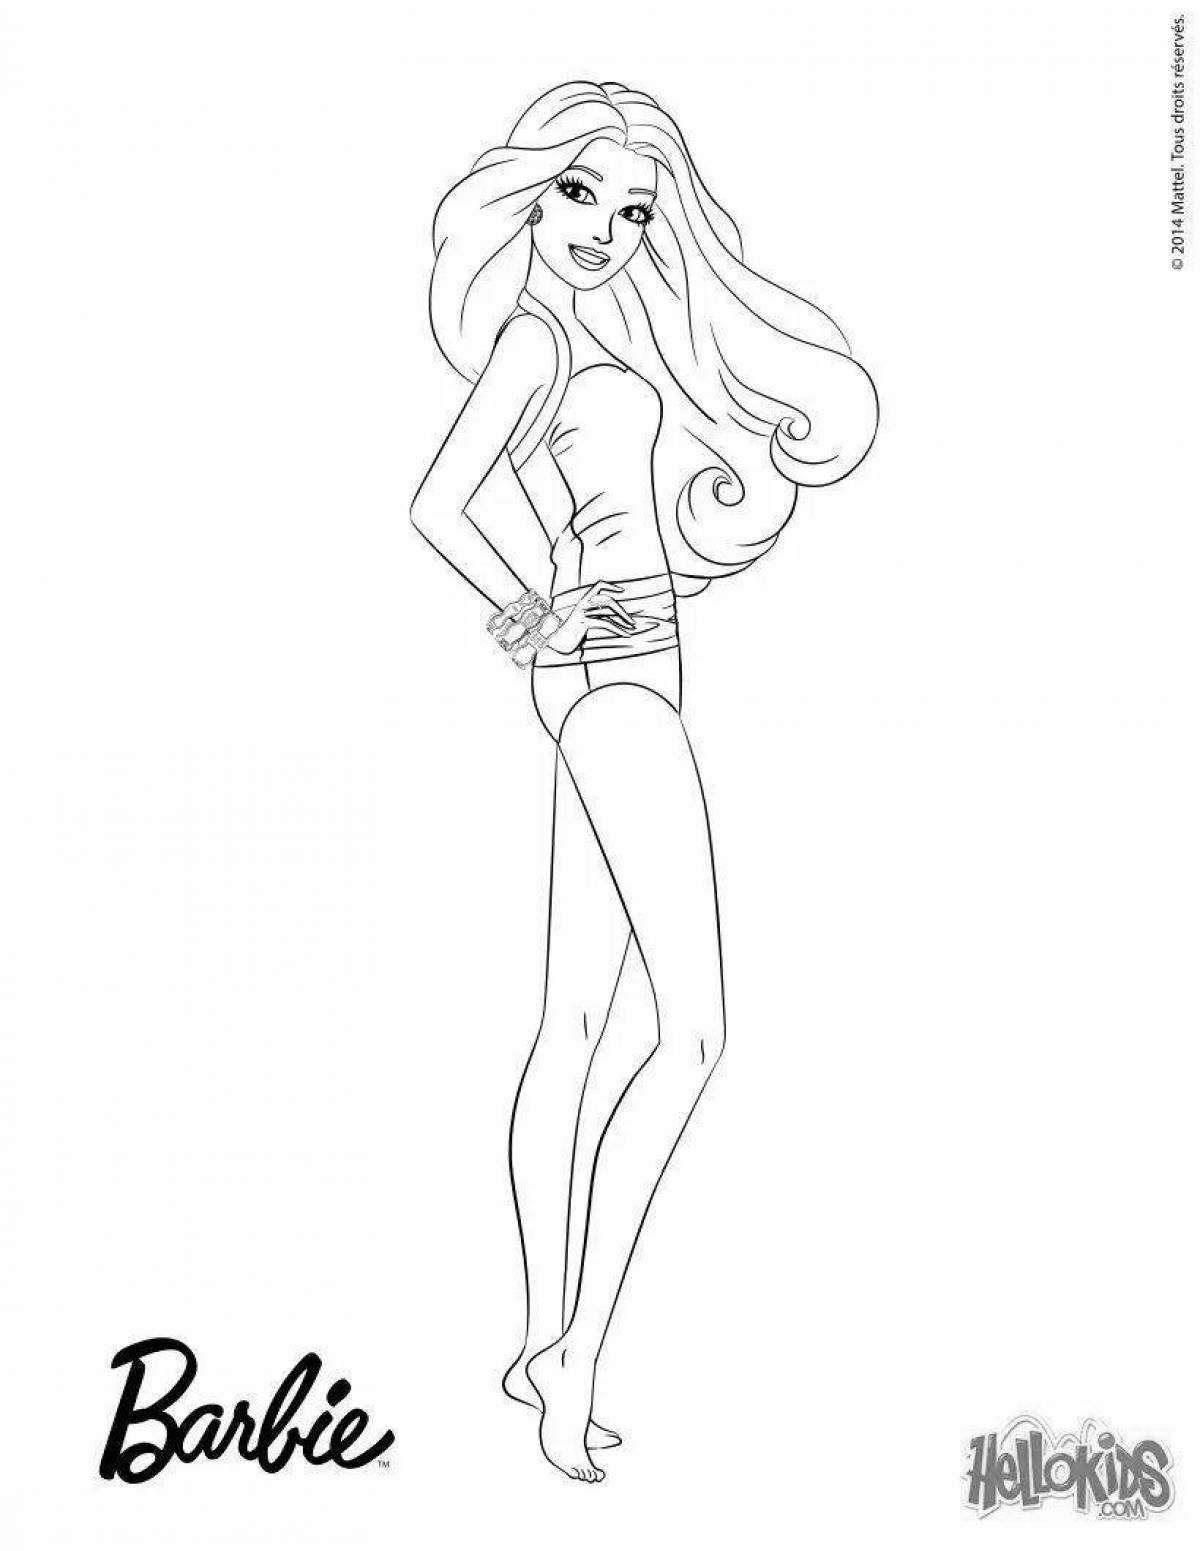 Bright barbie in swimsuit coloring book